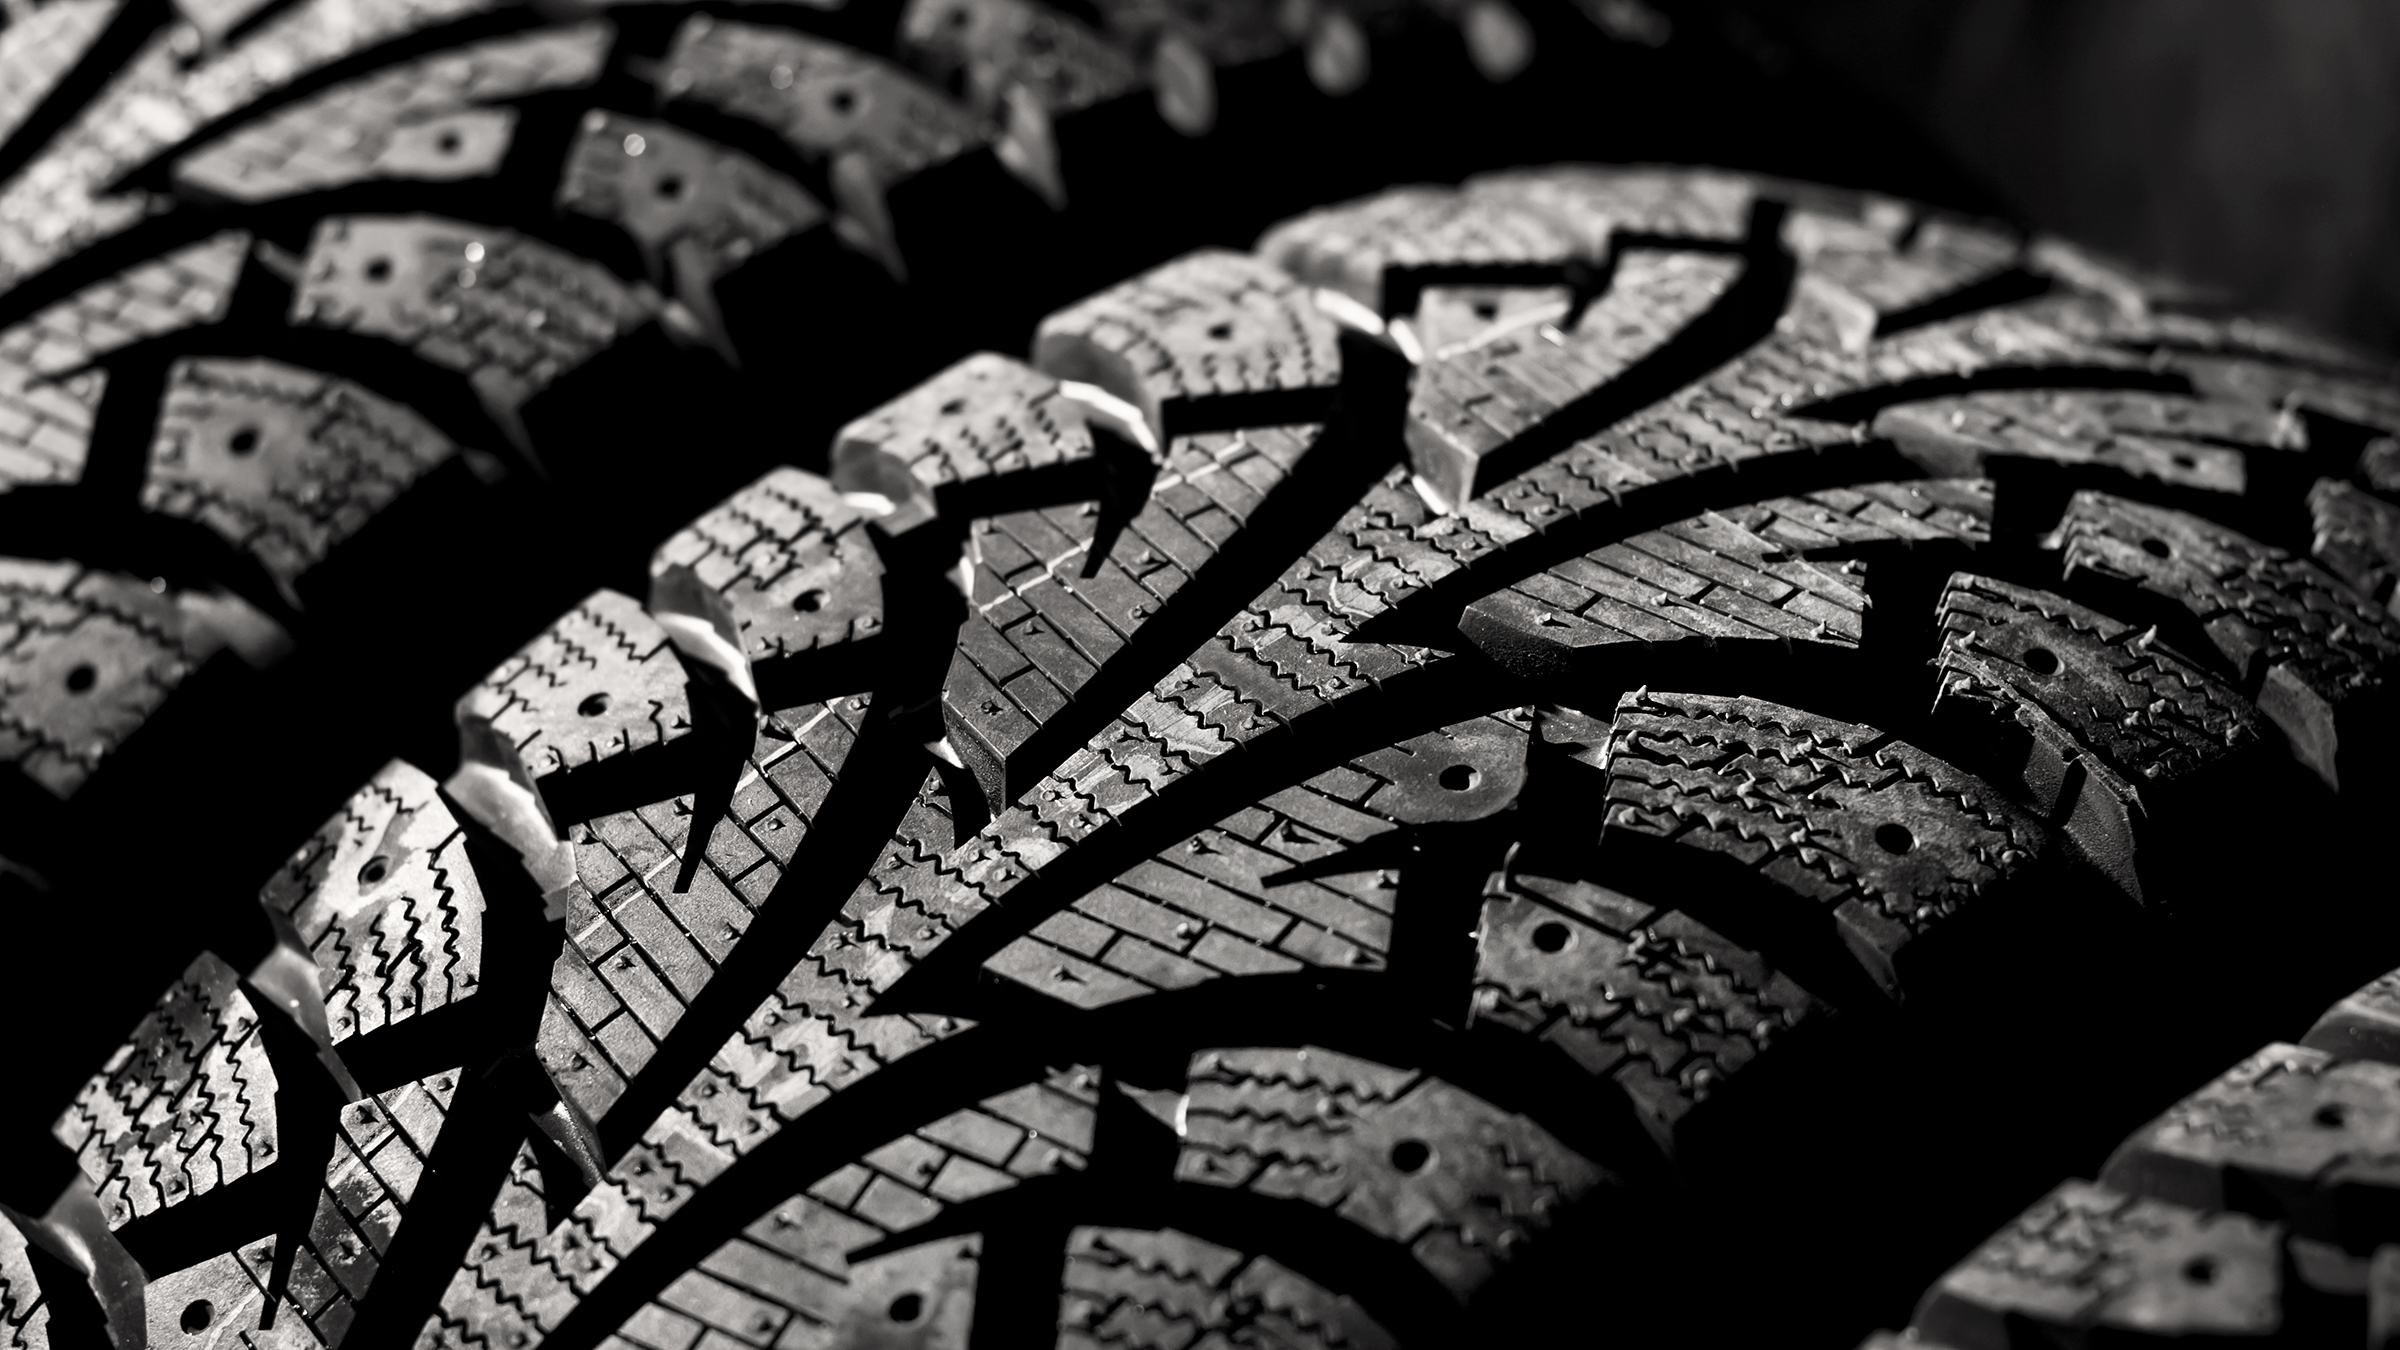 Insights  How To Properly Mark Tires - Tire Supply Network